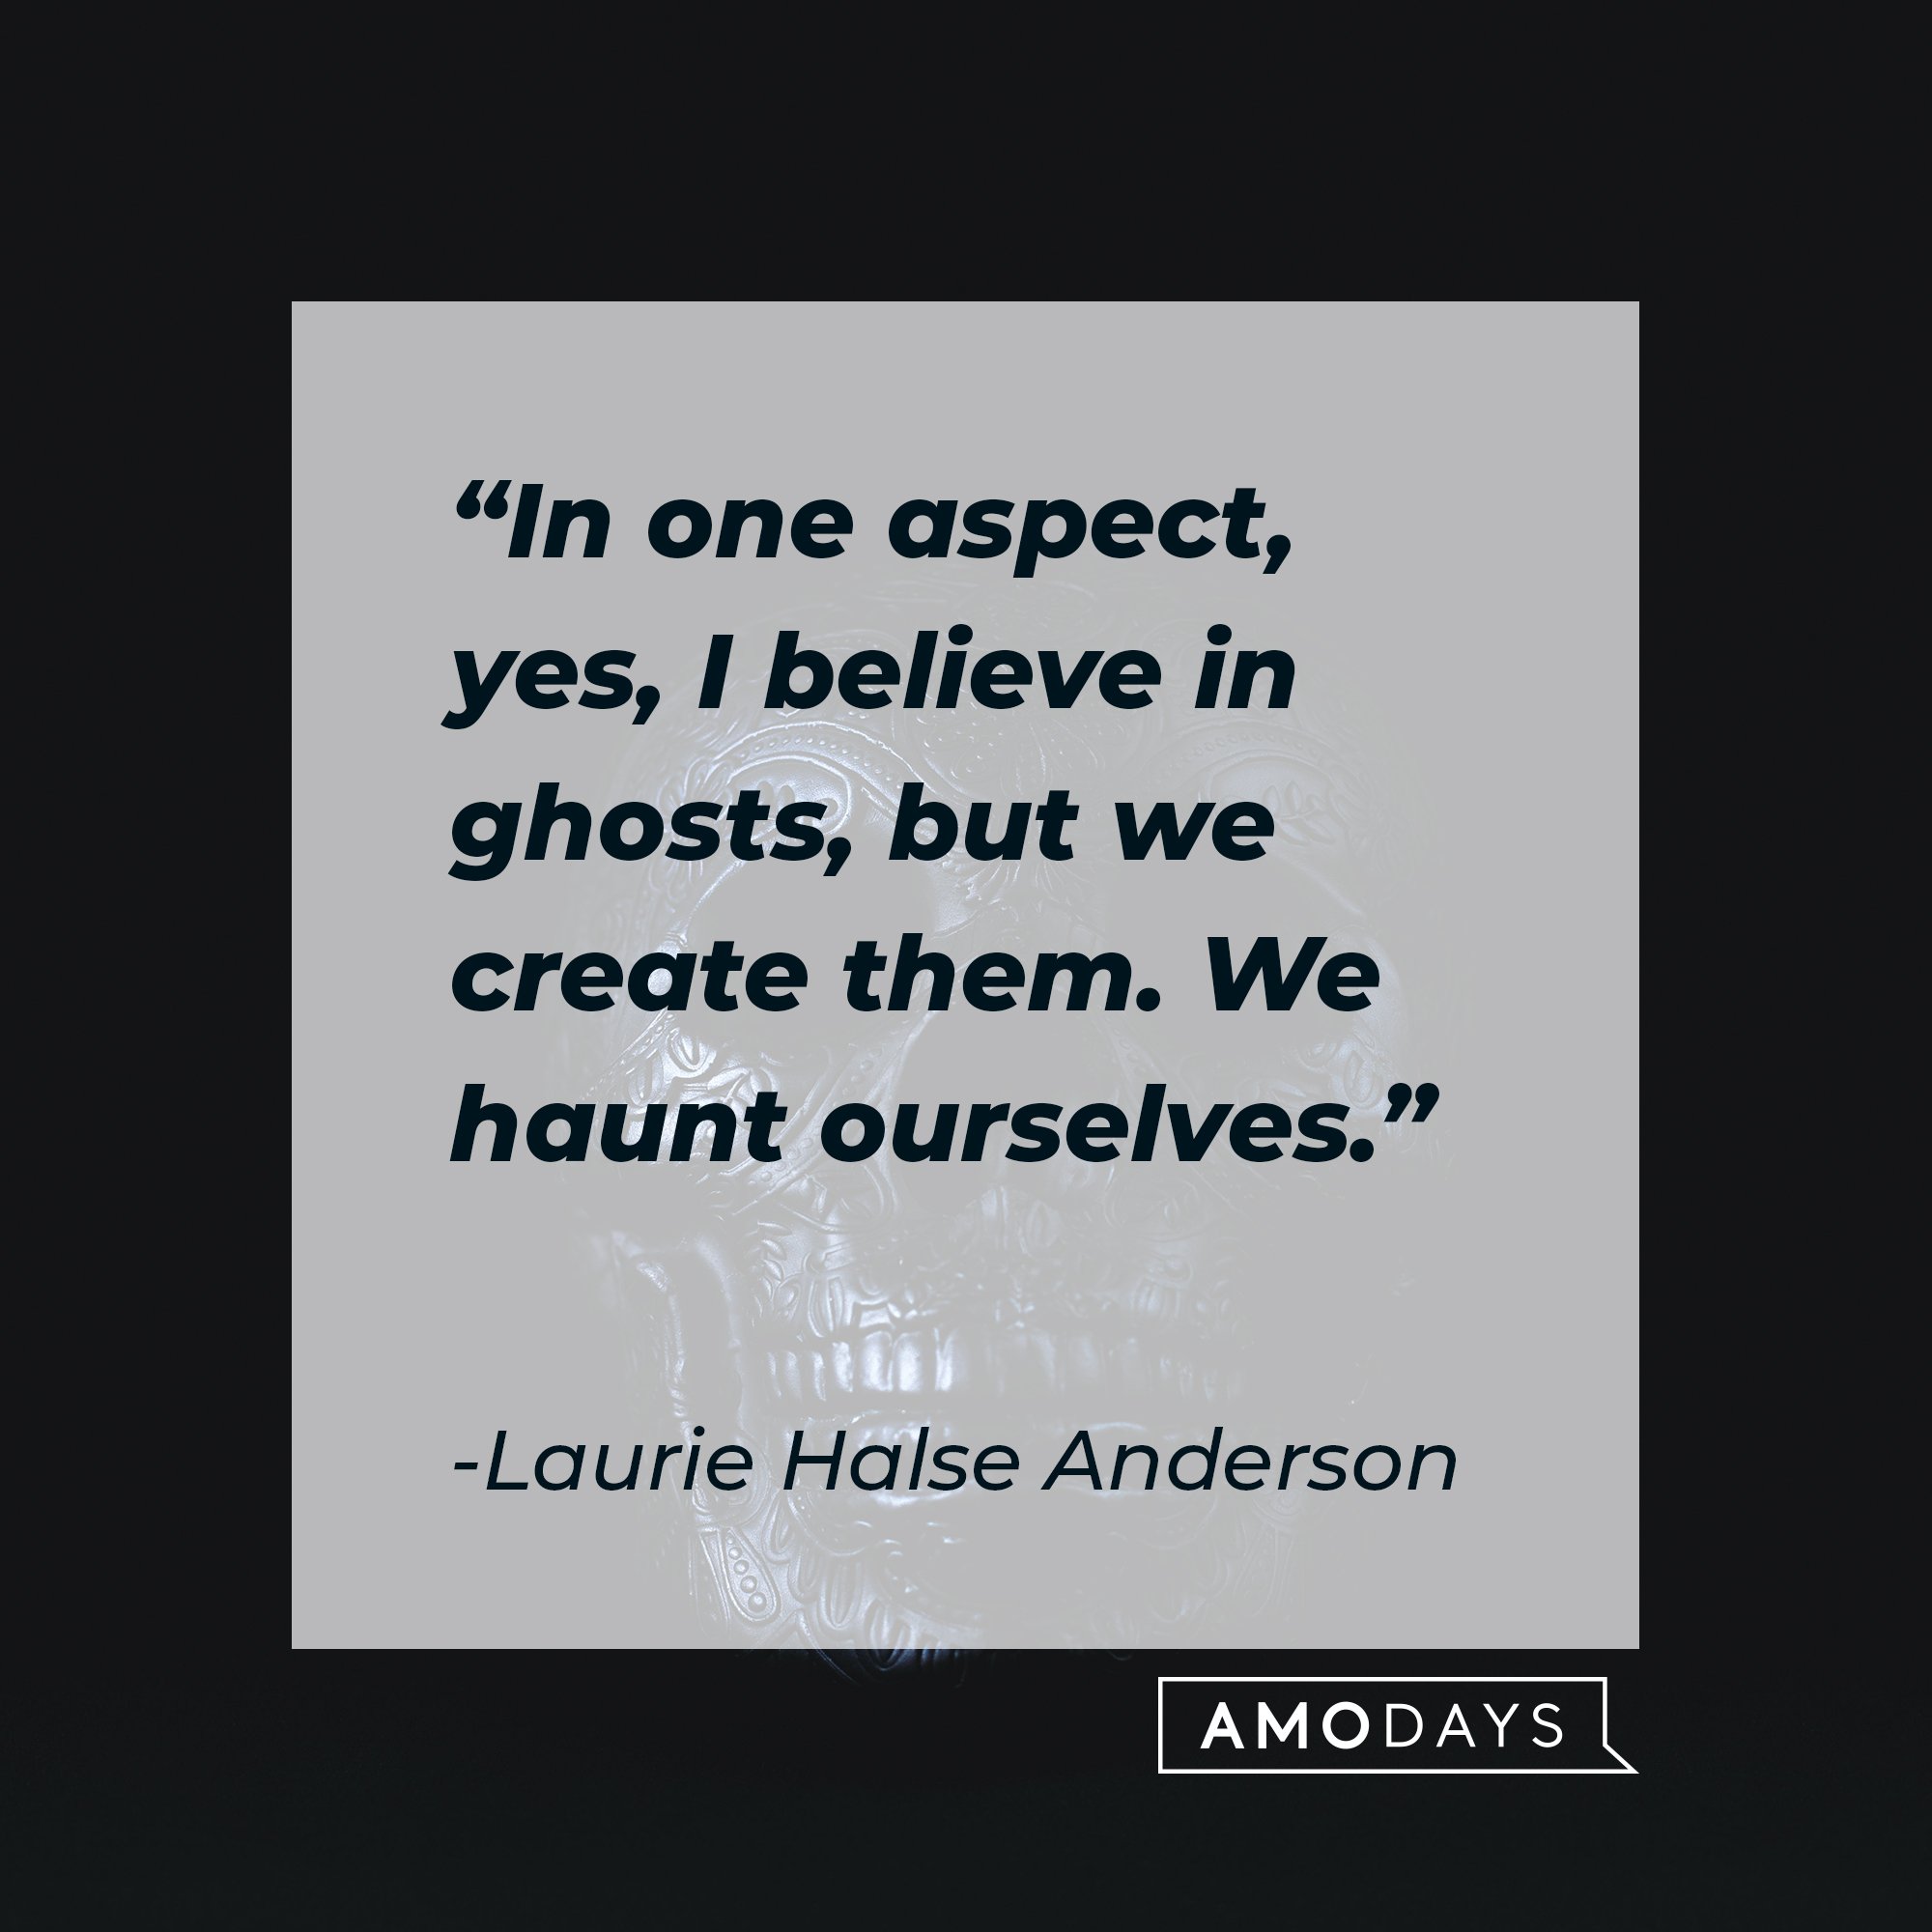 Laurie Halse Anderson’s quote: "In one aspect, yes, I believe in ghosts, but we create them. We haunt ourselves." | Image: AmoDays 